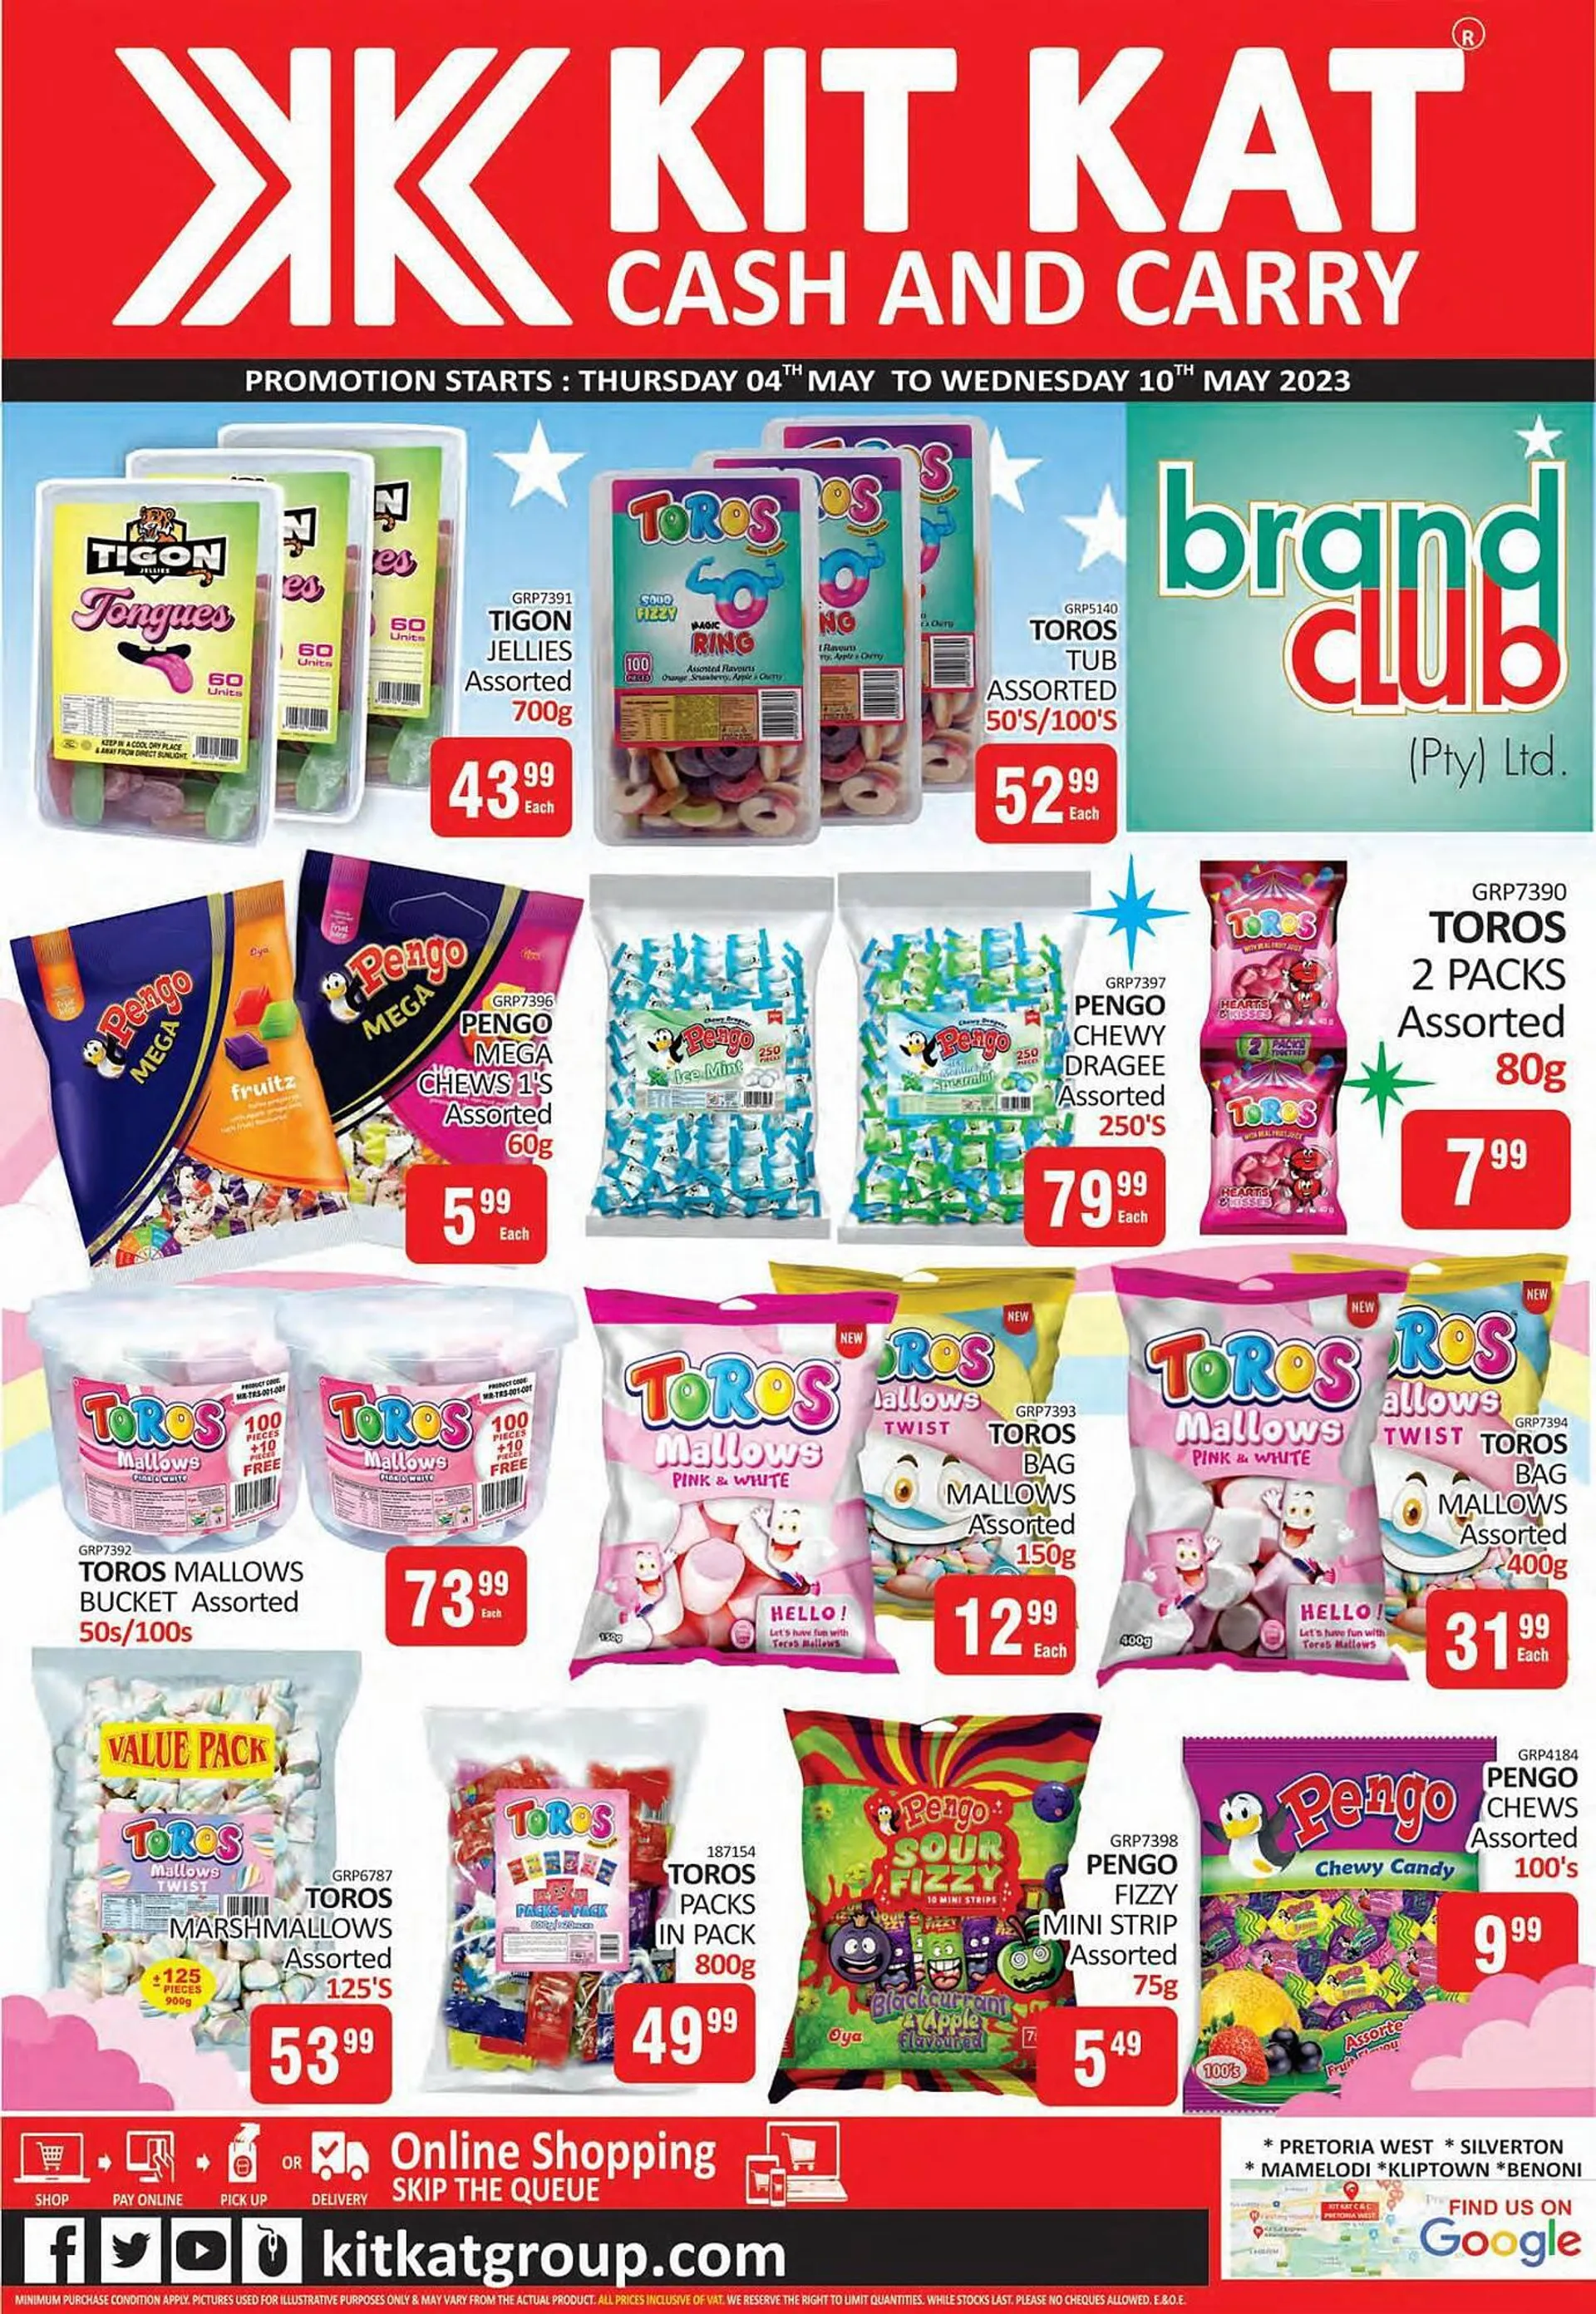 KitKat Cash and Carry catalogue - 4